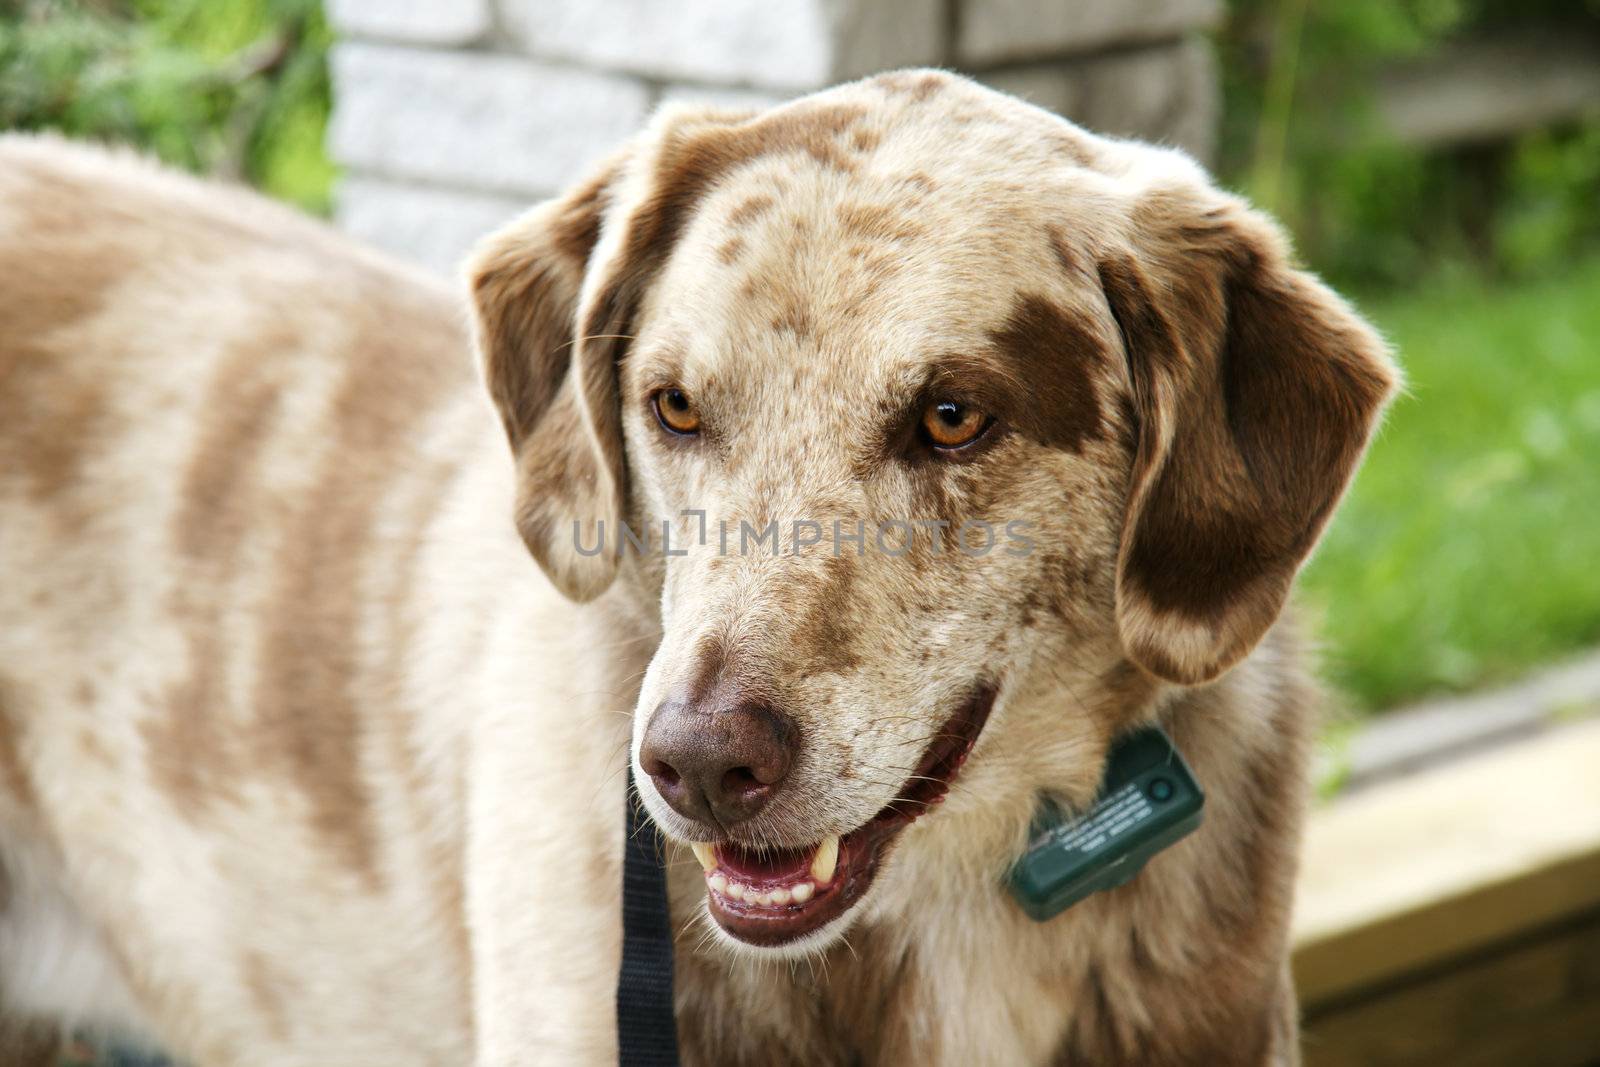 Large mix breed dog with funny face and colors, wearing an anti-bark collar.  